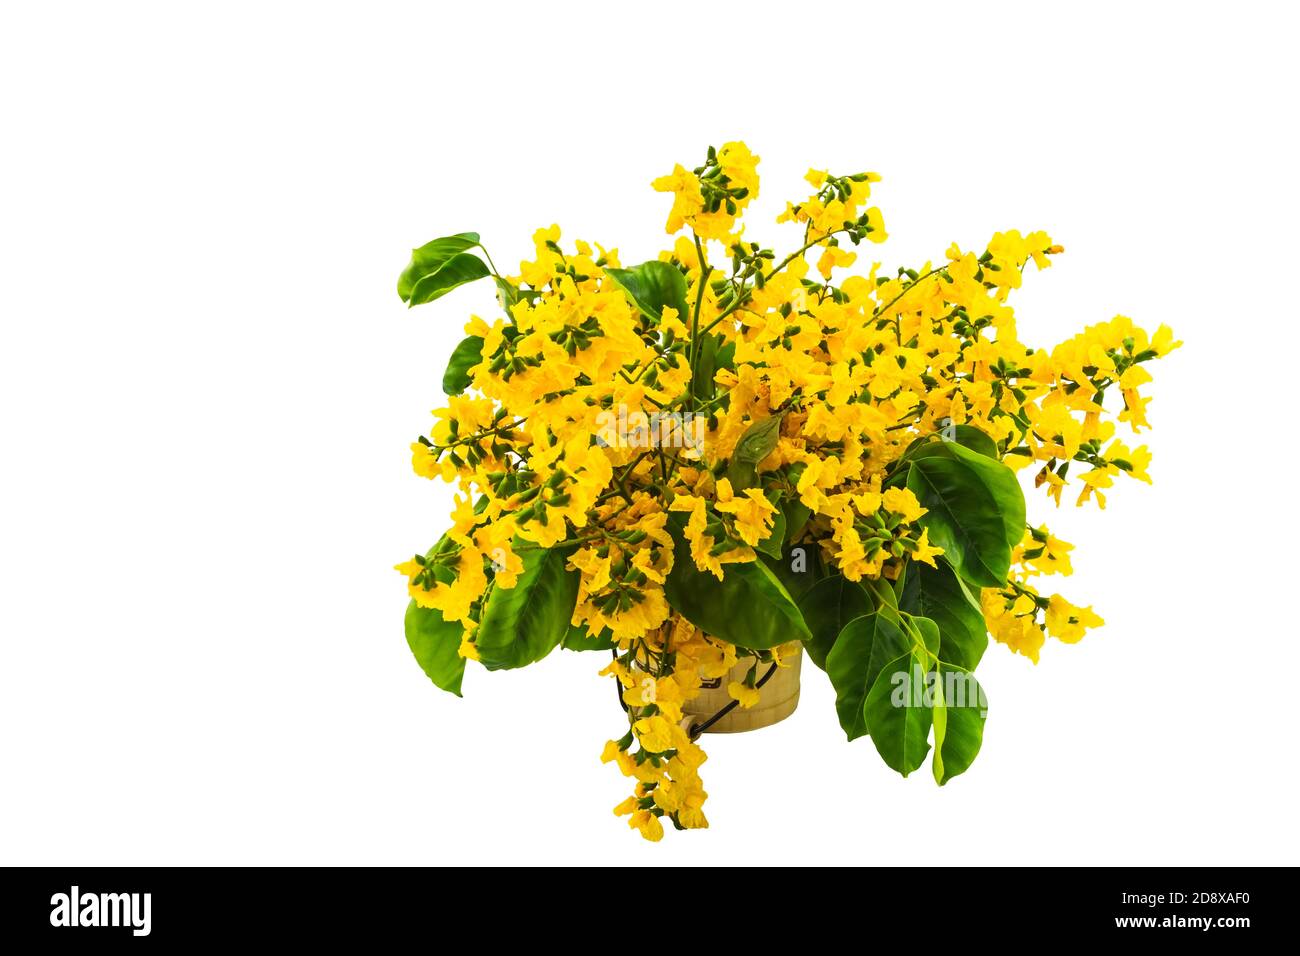 Closed up yellow flower of Burmese Rosewood or Pterocarpus indicus Willd,Burma Padauk and green leaf in vase isolated on white background.Saved with c Stock Photo